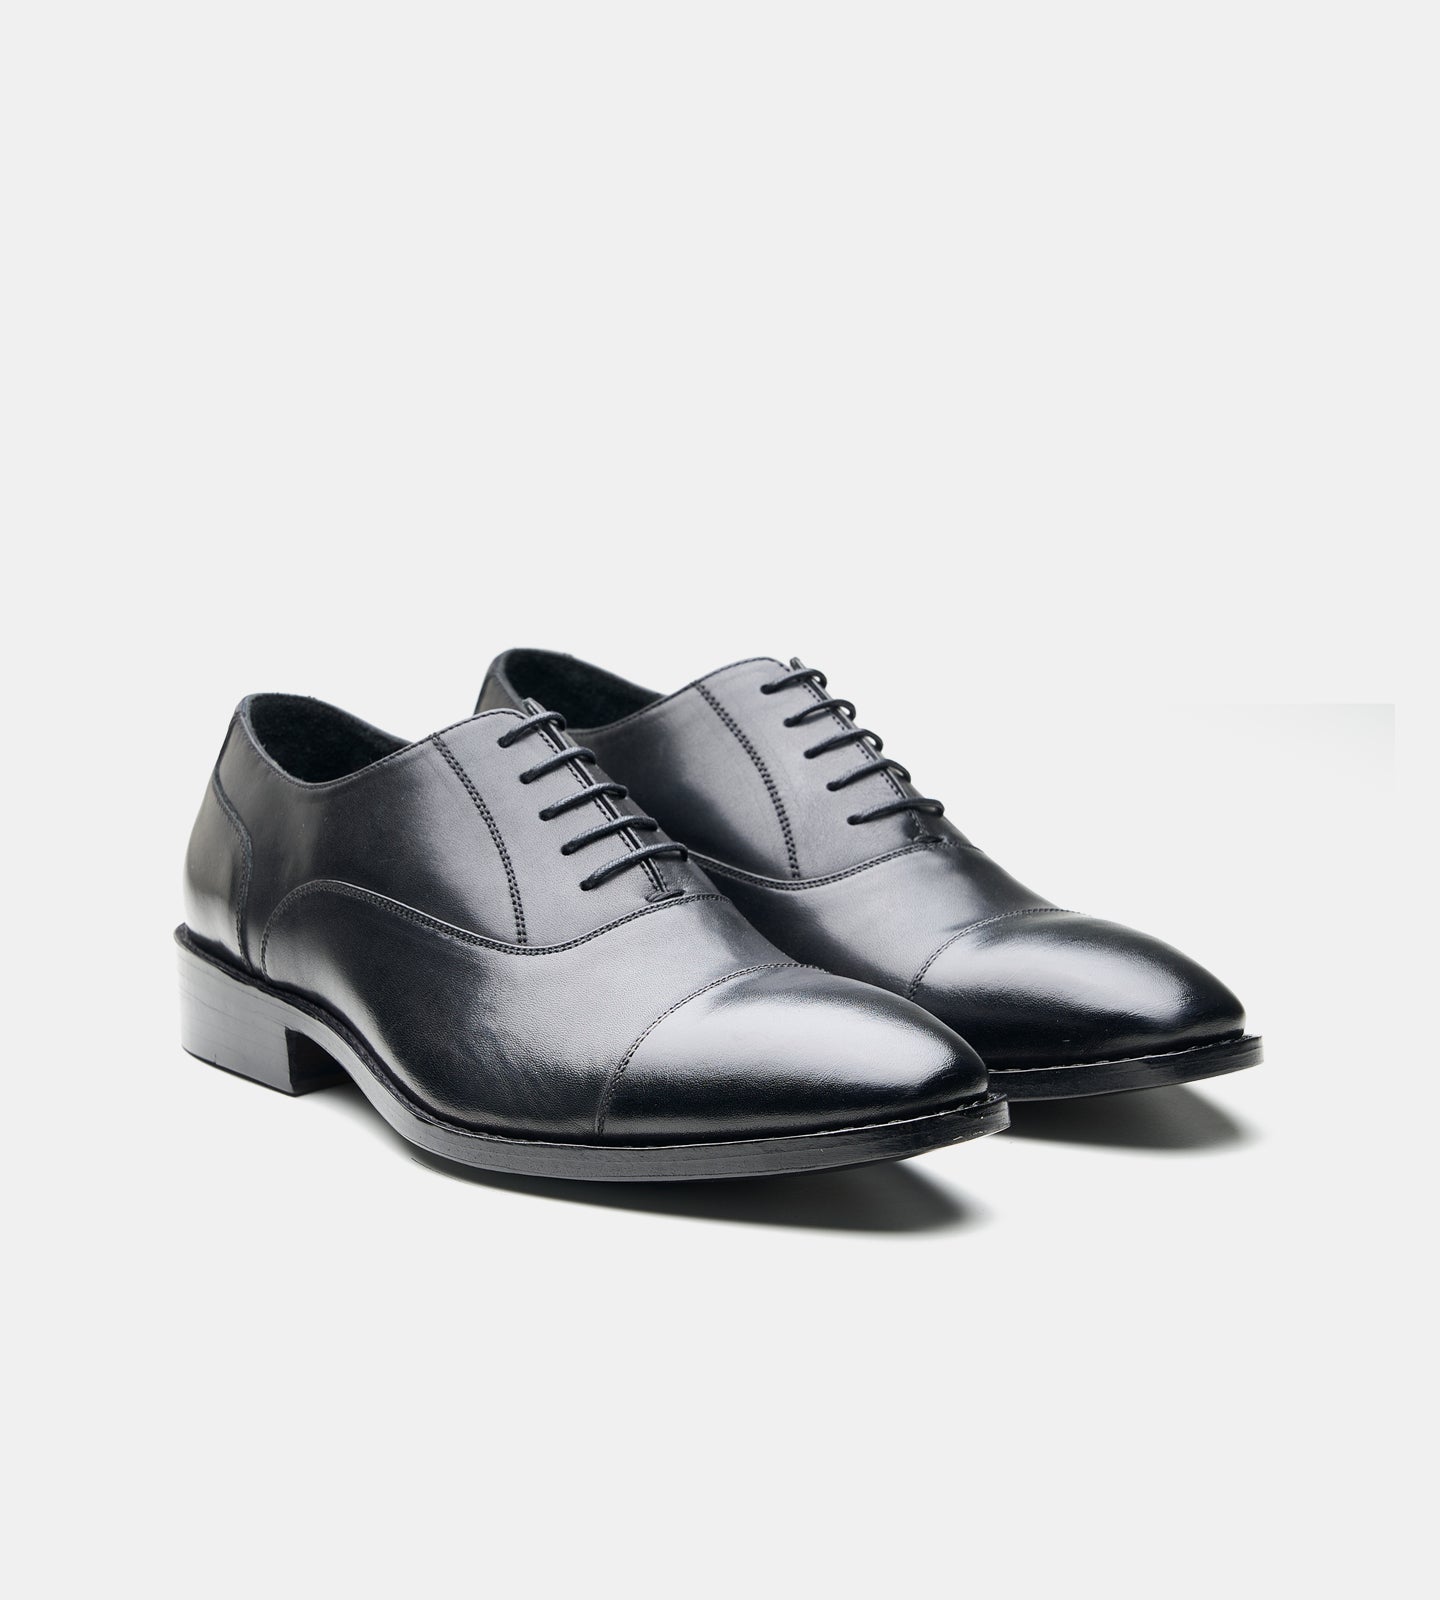 Goodyear Welted Chisel Toe Black Captoe Oxfords